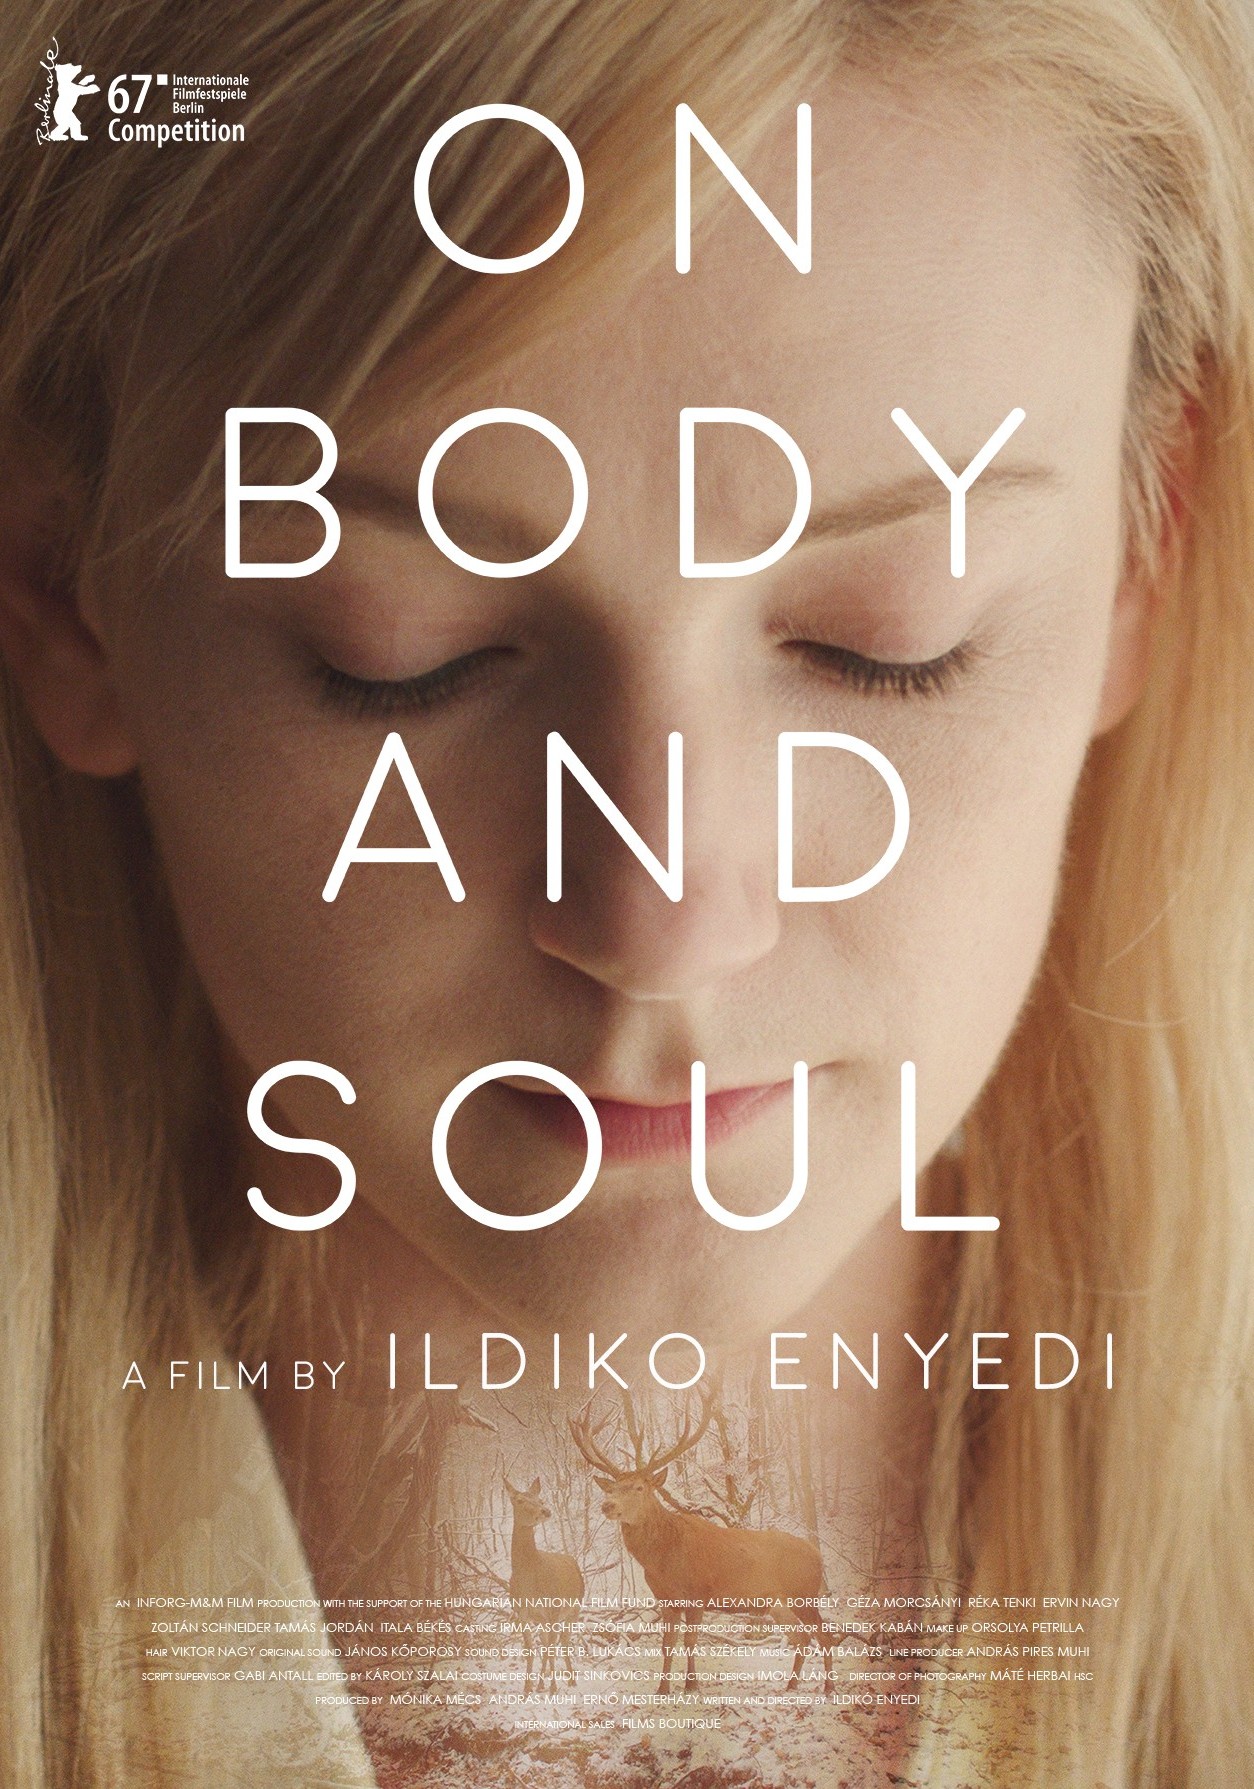 On Body and Soul (2017) ★★★★★